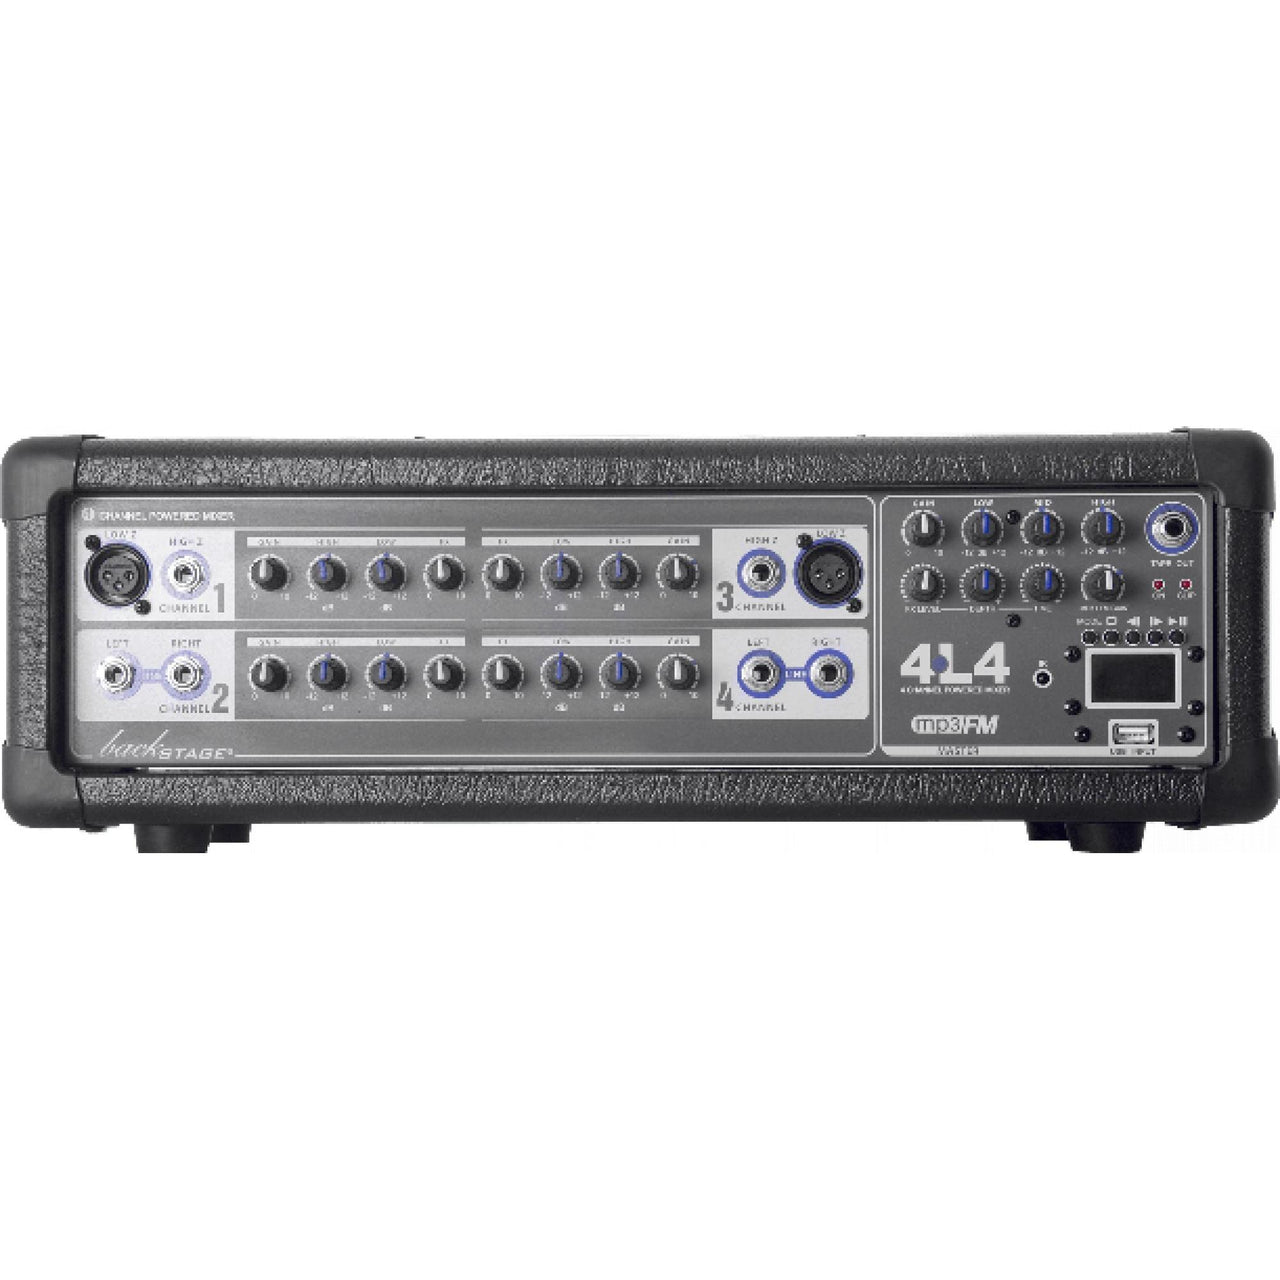 Consola Back-stage 4l4 Usb Para Lineas Y Microfono 4 Canales